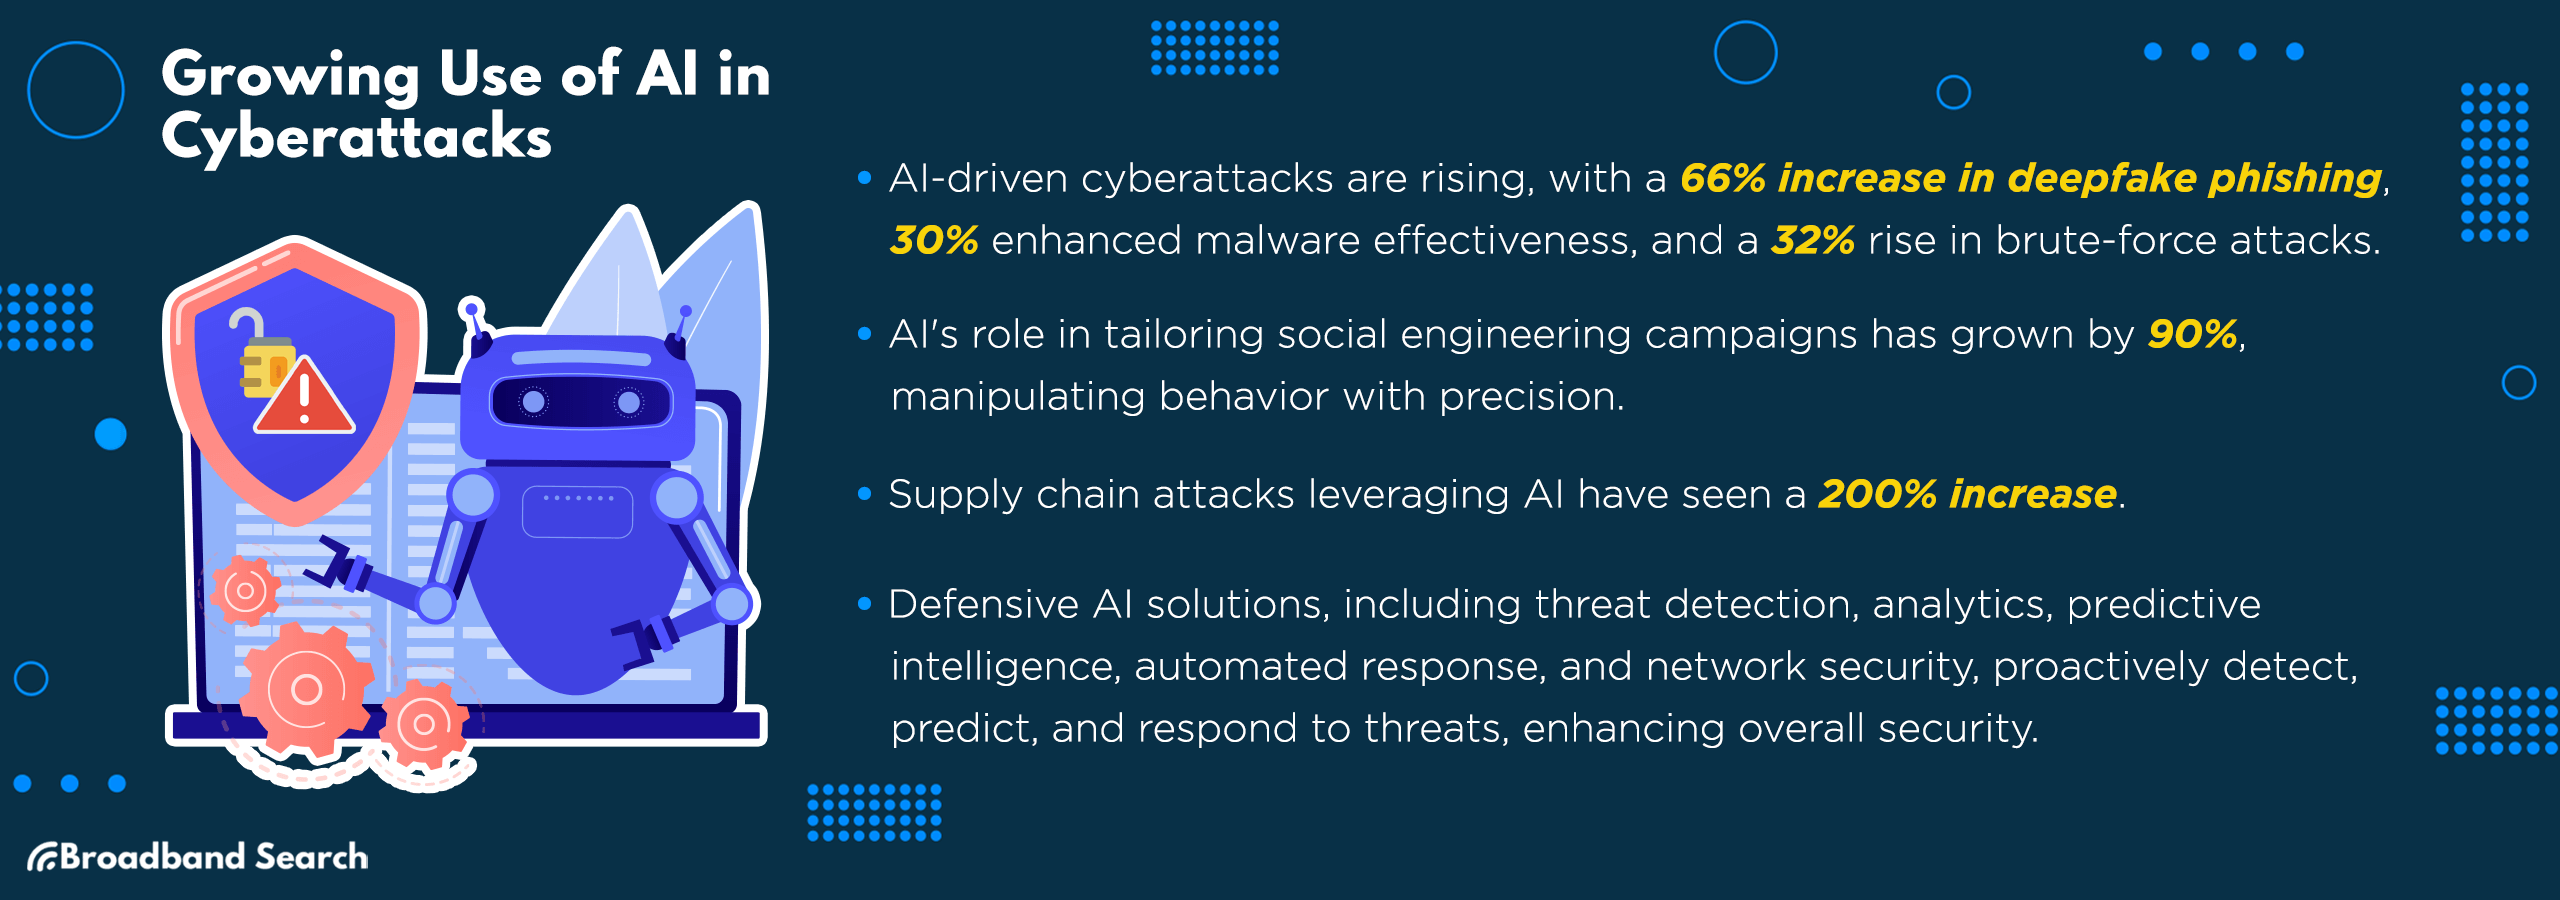 Data on the growing use of AI in cyberattacks